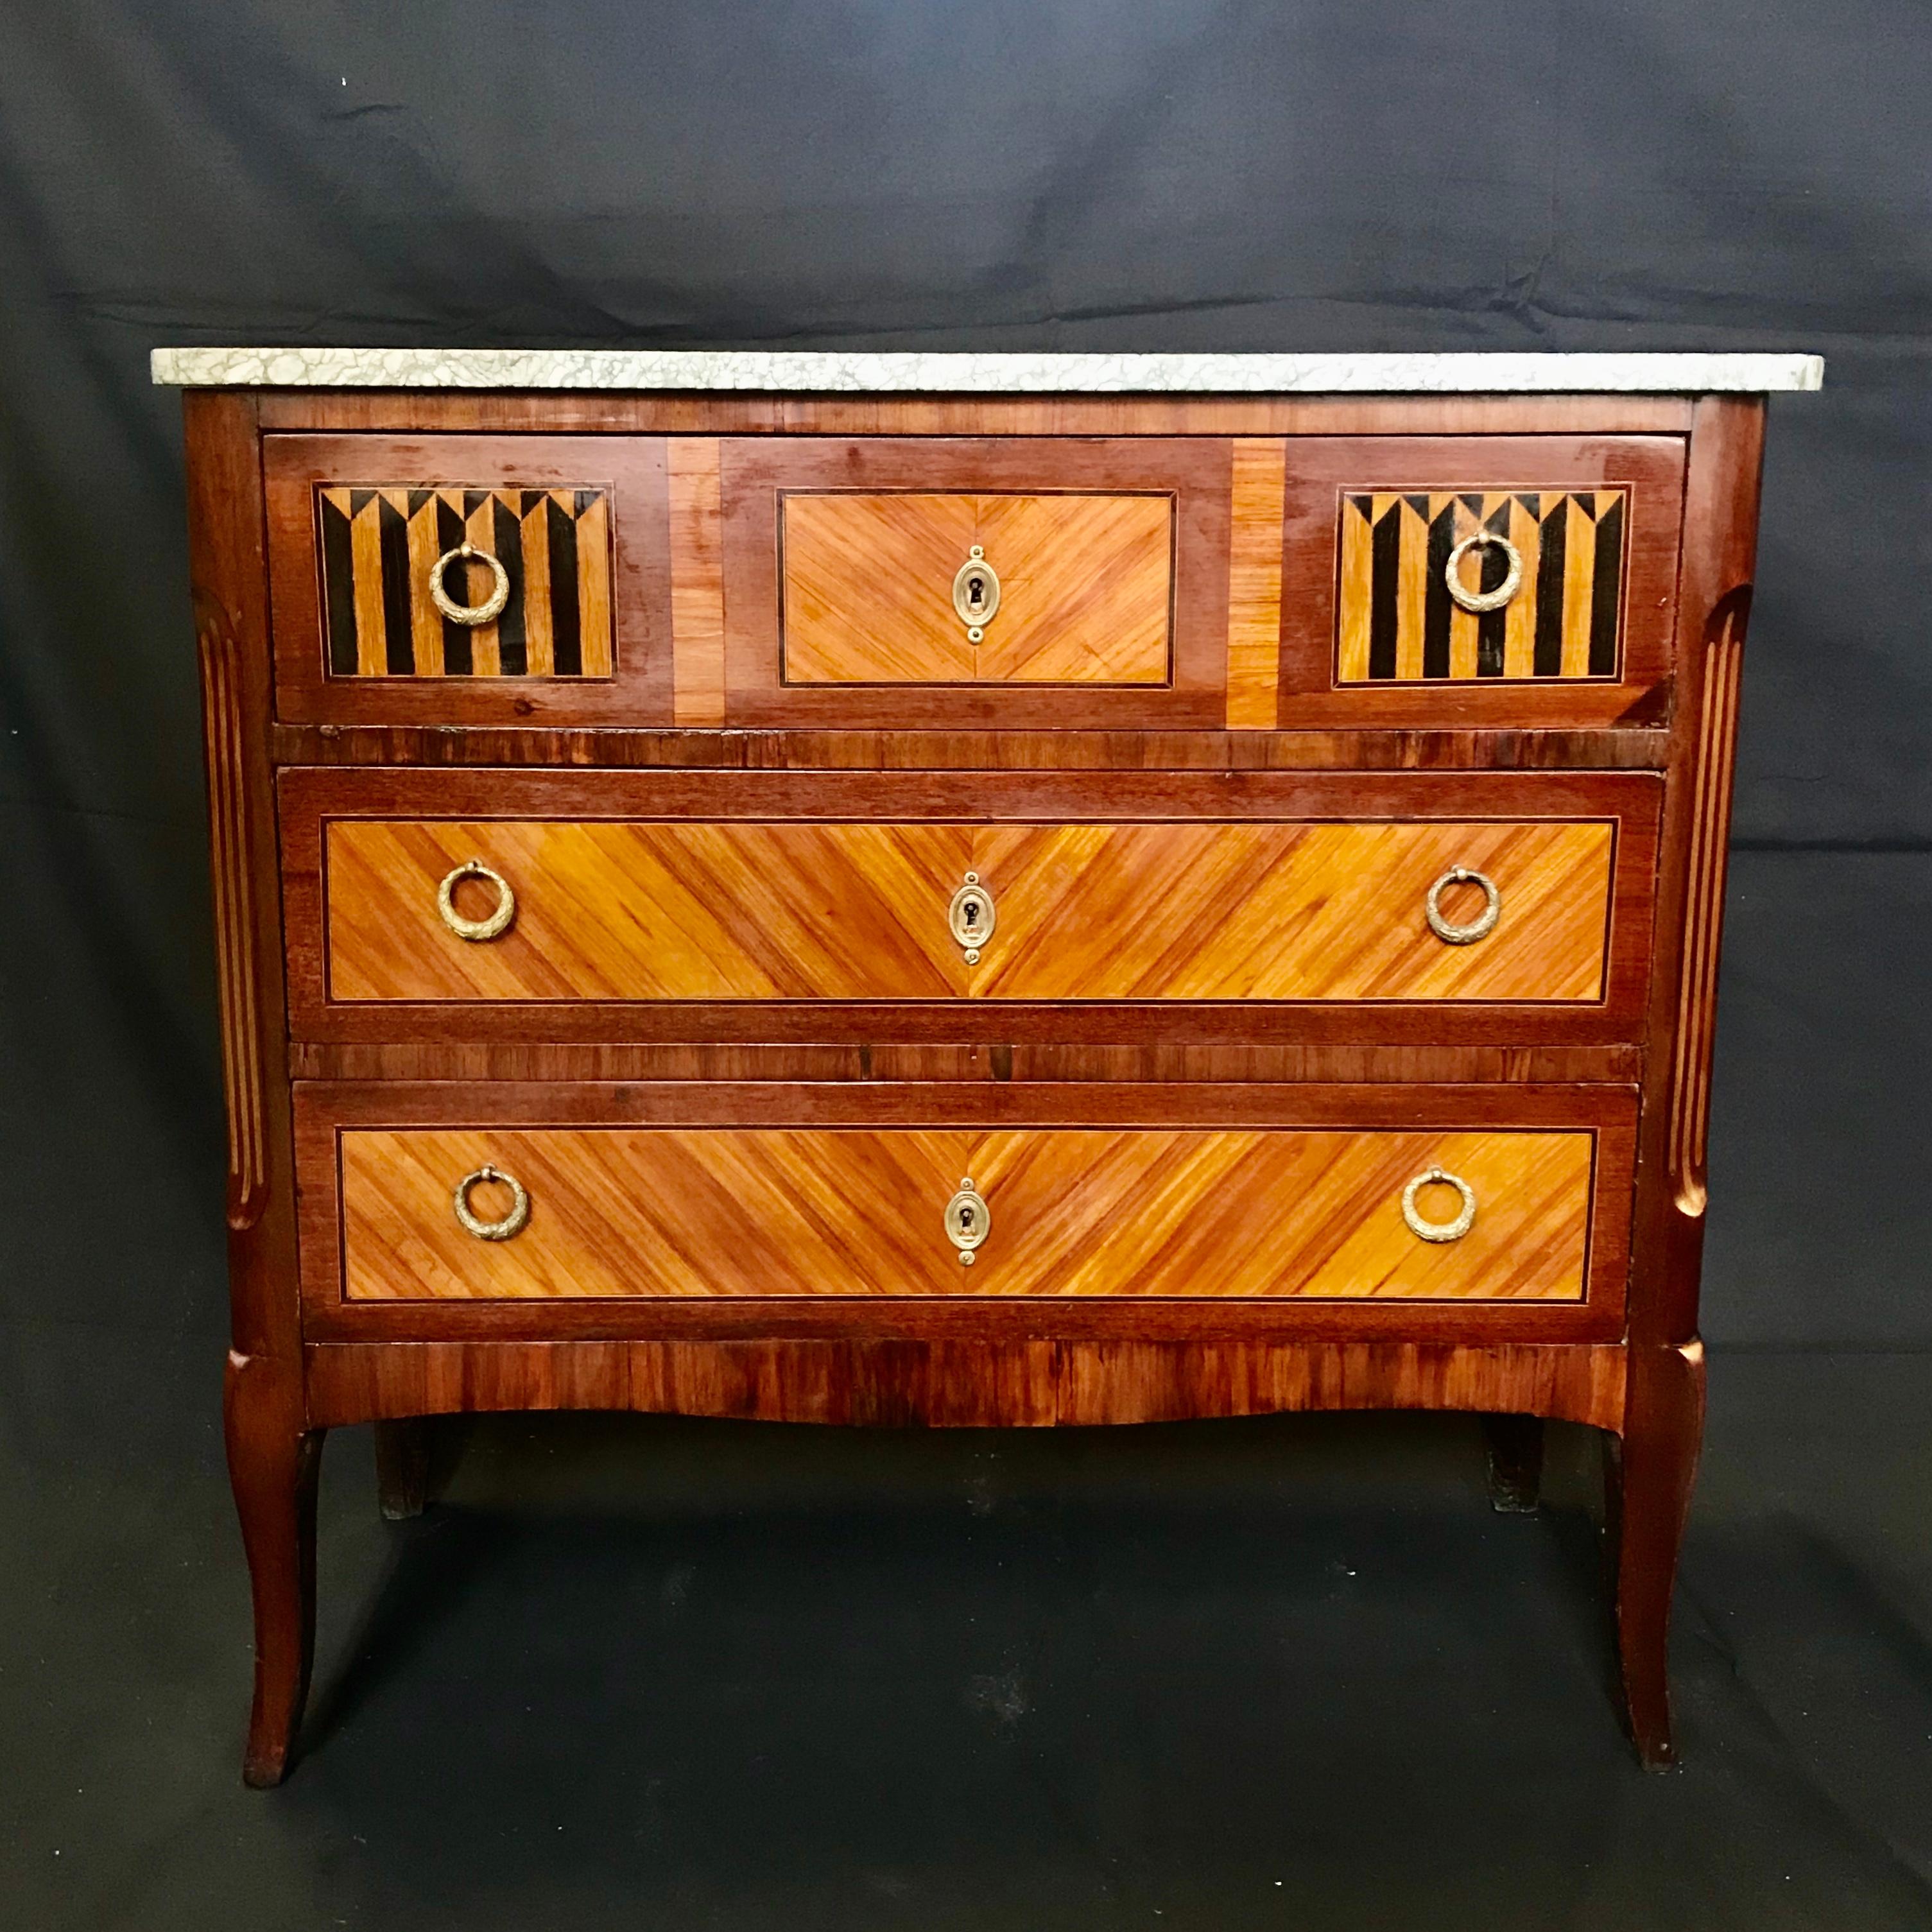 Absolutely beautiful walnut French Louis XVI style marquetry inlaid petite commode with marble top and intricate ebony inlay. Original brass hardware.
#4275.
 